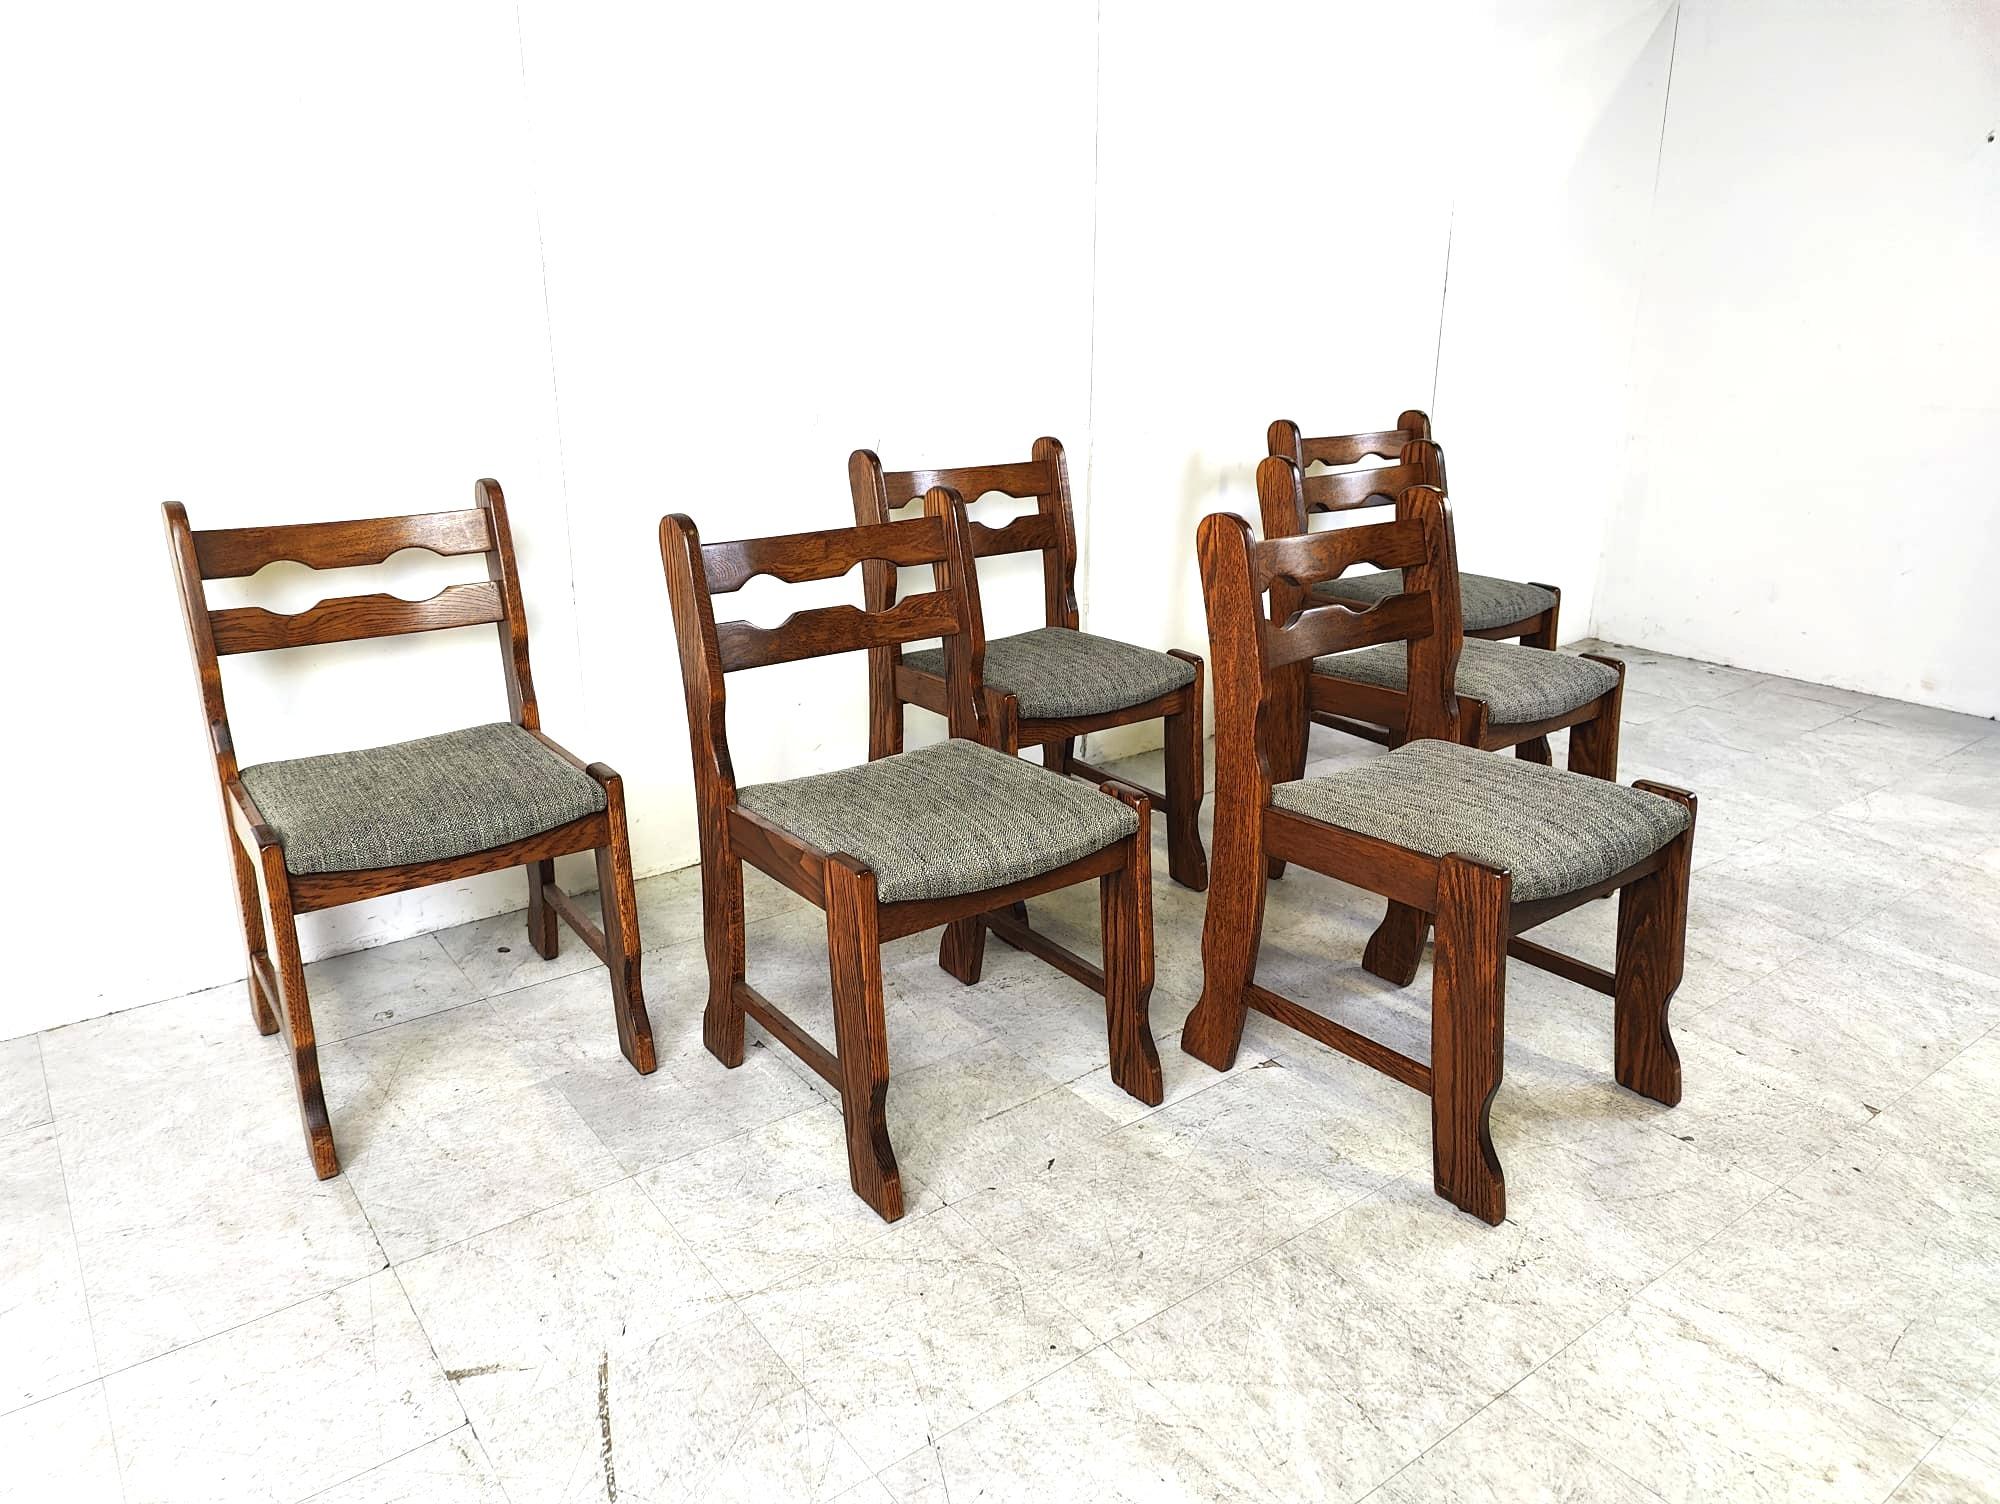 Vintage brutalist dining chairs, set of 6 - 1970s For Sale 1